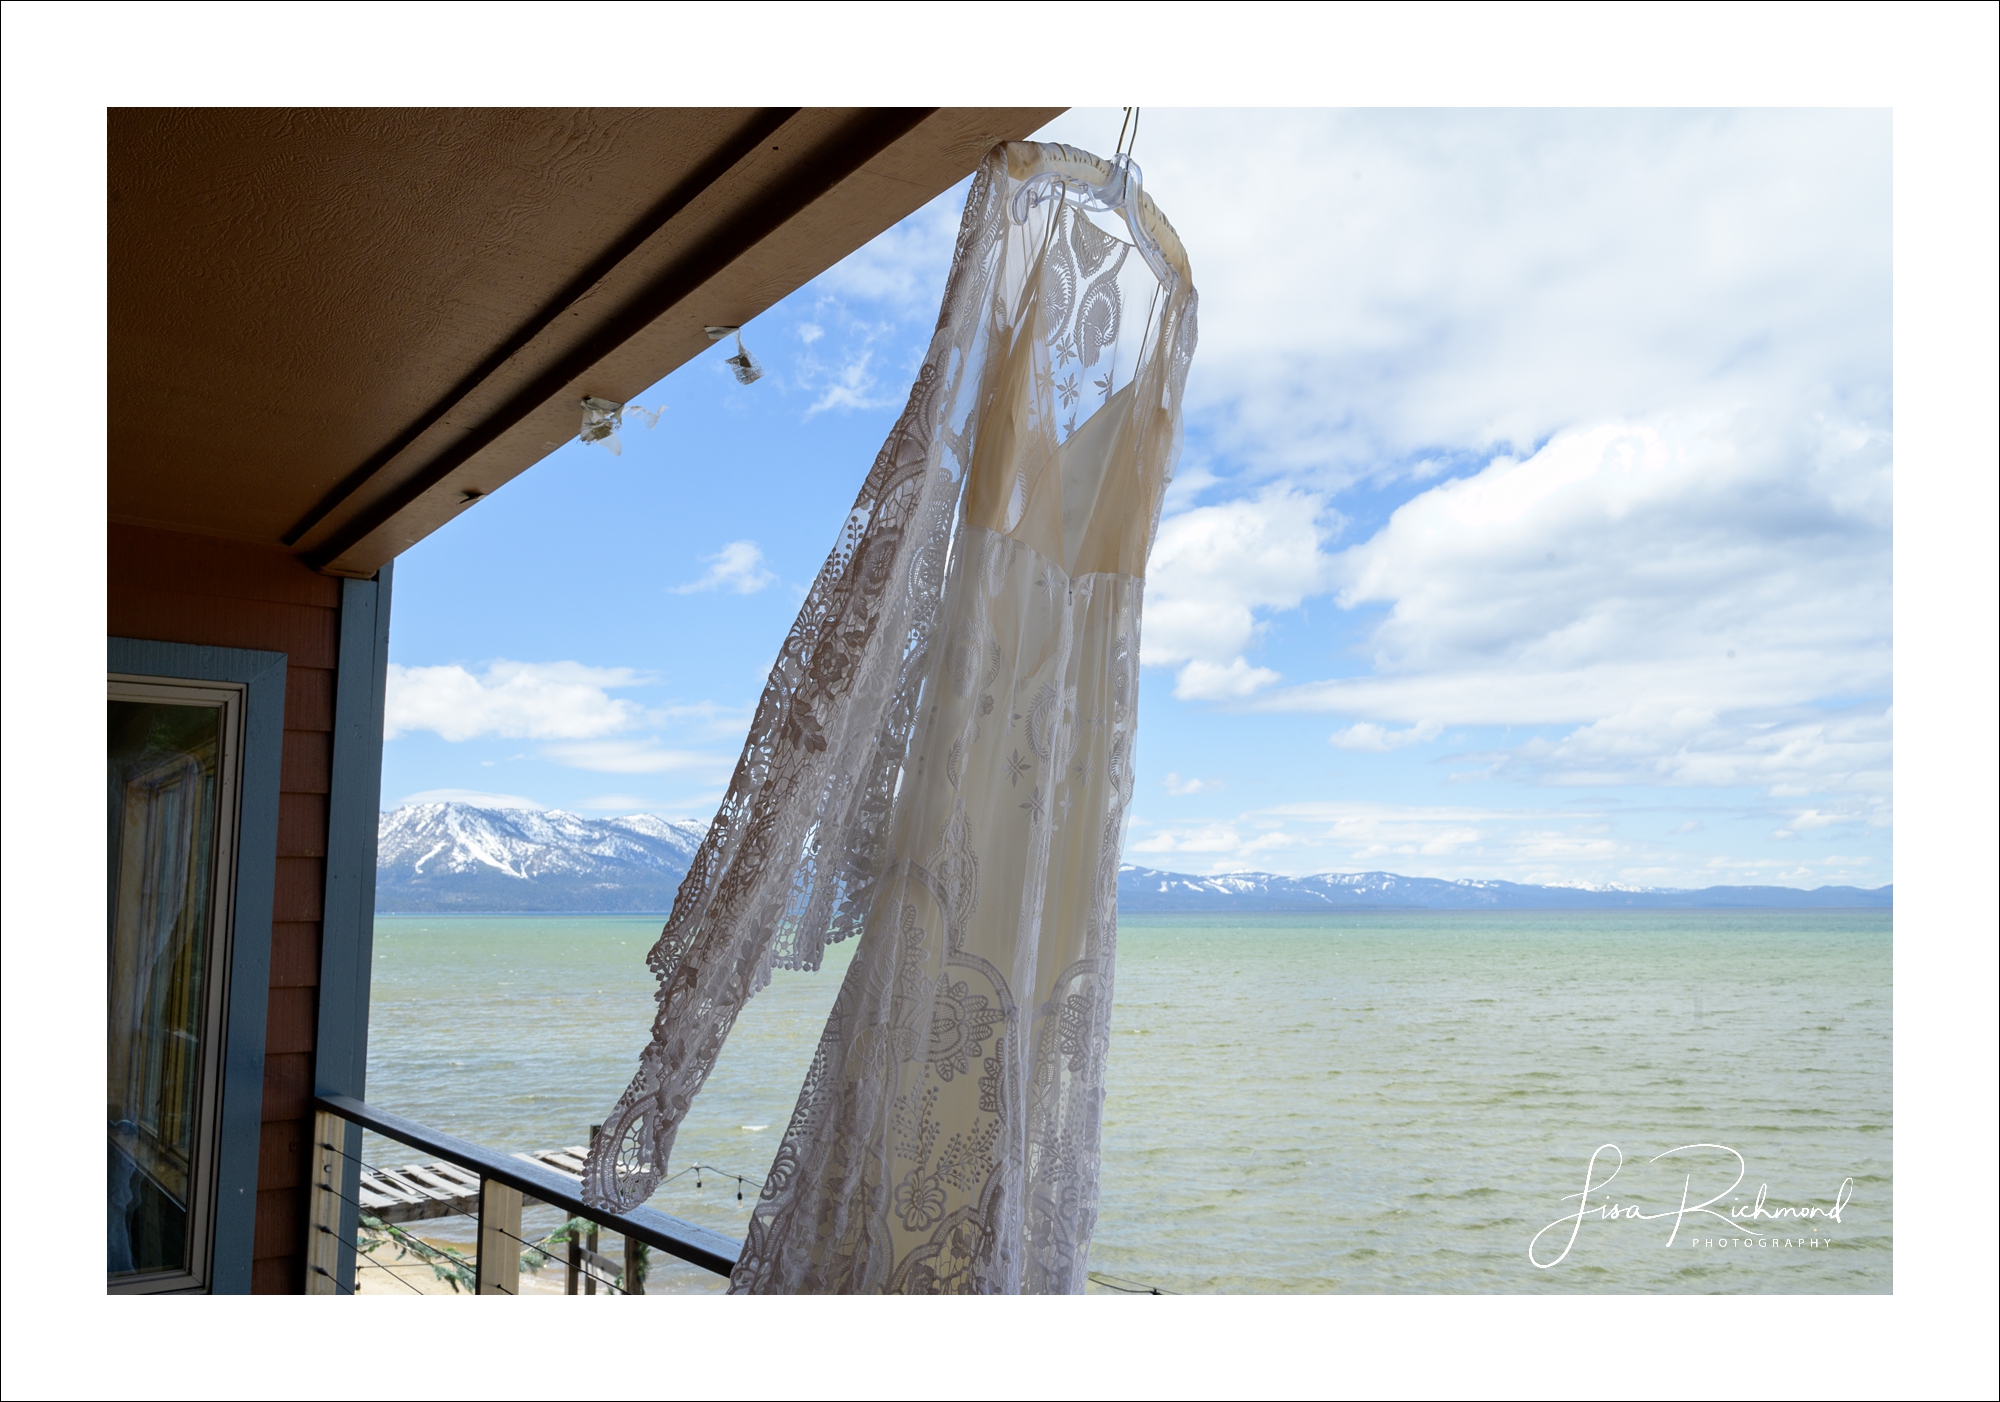 Matt and Madison &#8211; finally tie the knot at The Idle Hour on Lake Tahoe